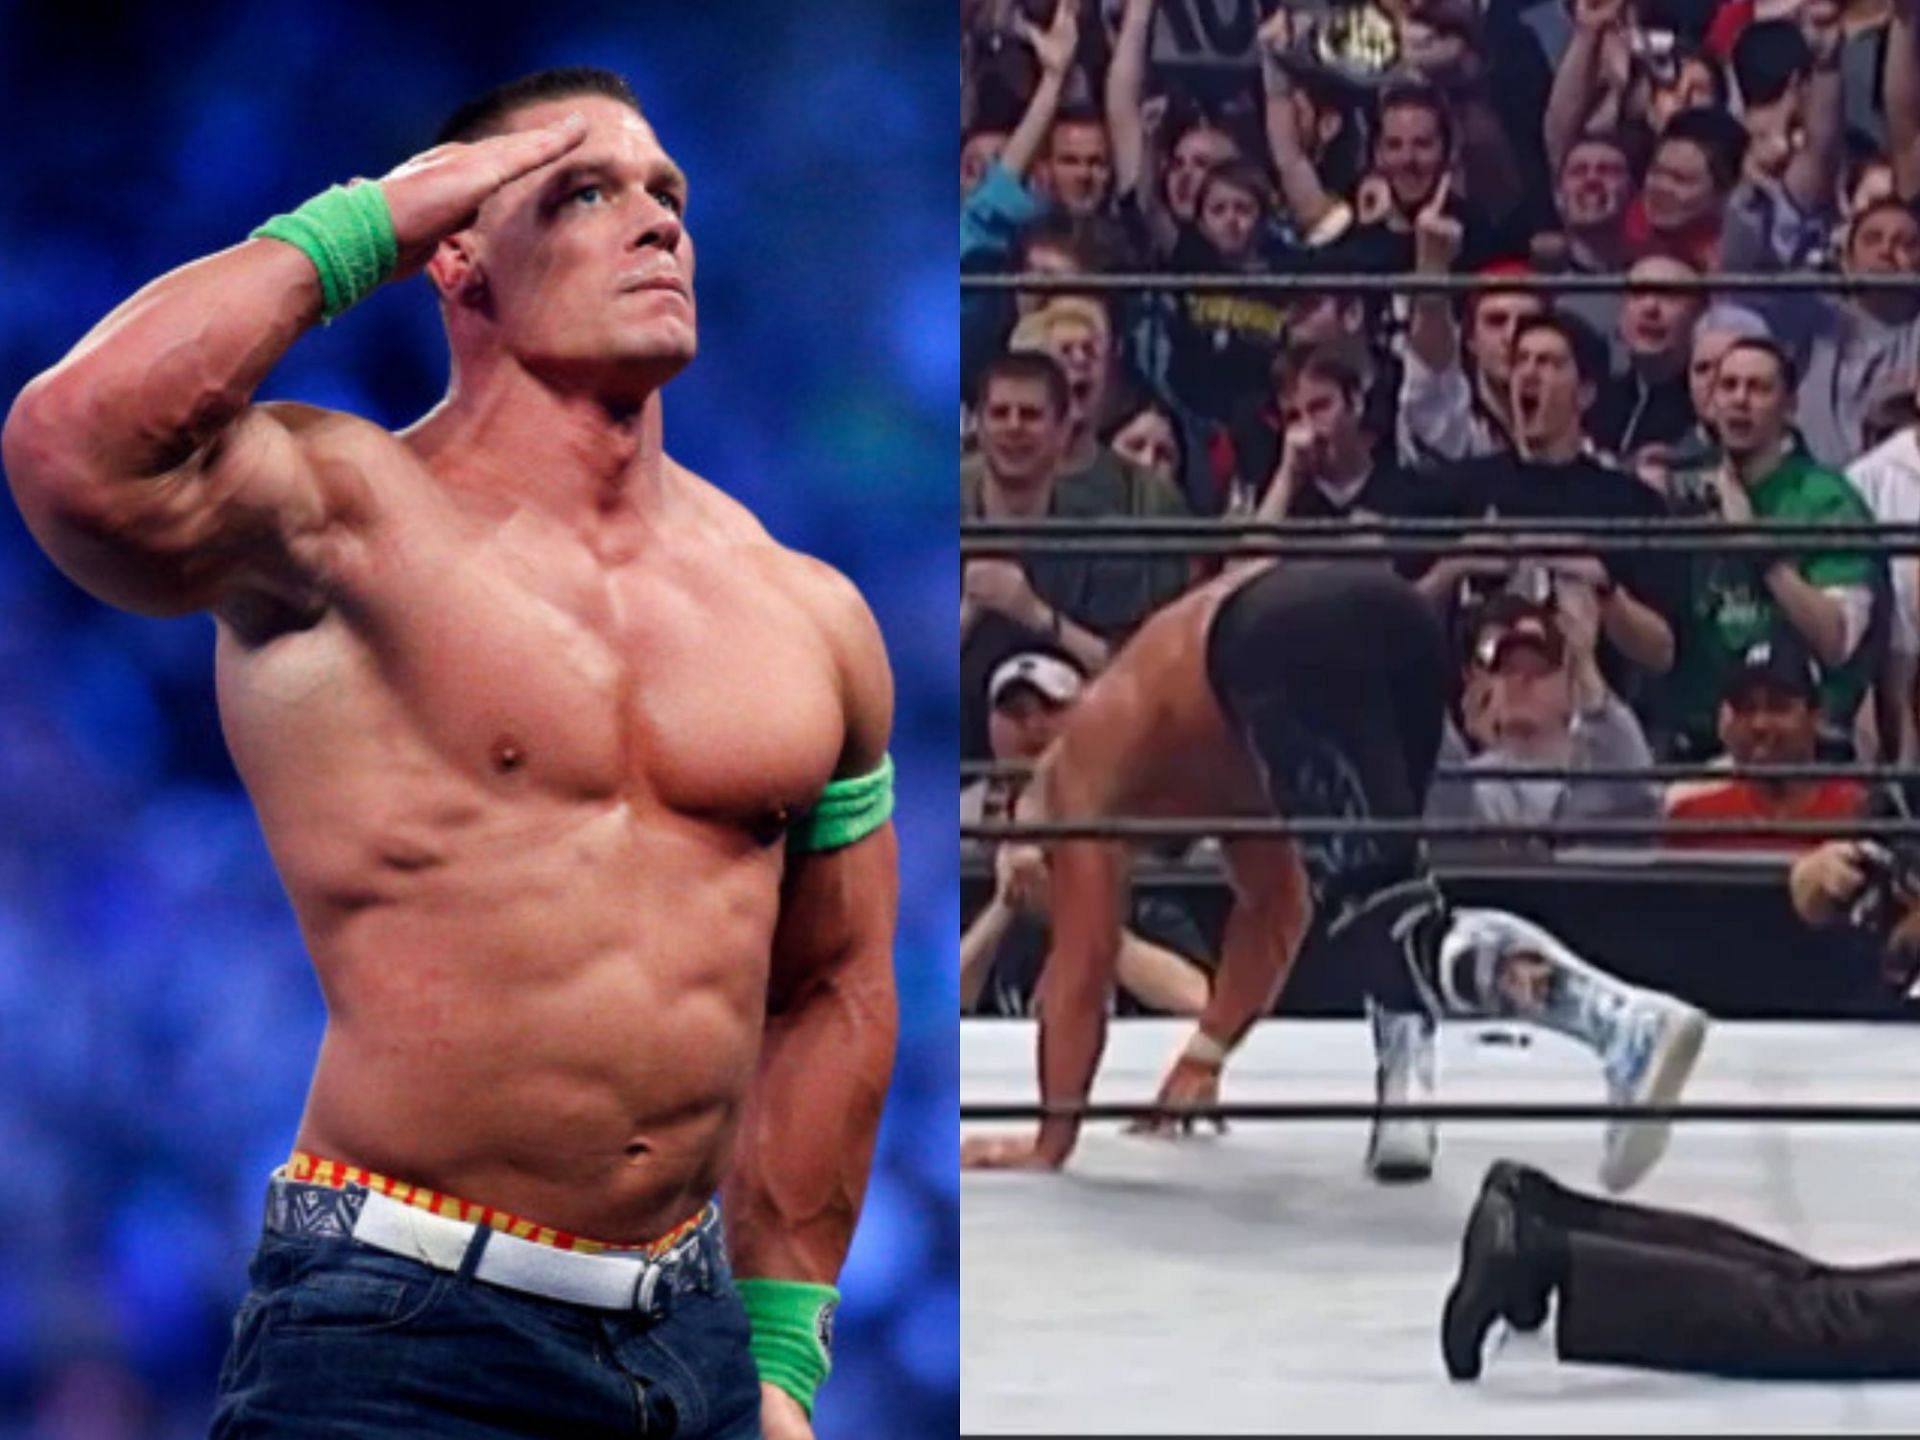 John Cena gave his take on why The Rock vs Hulk Hogan was such a special match